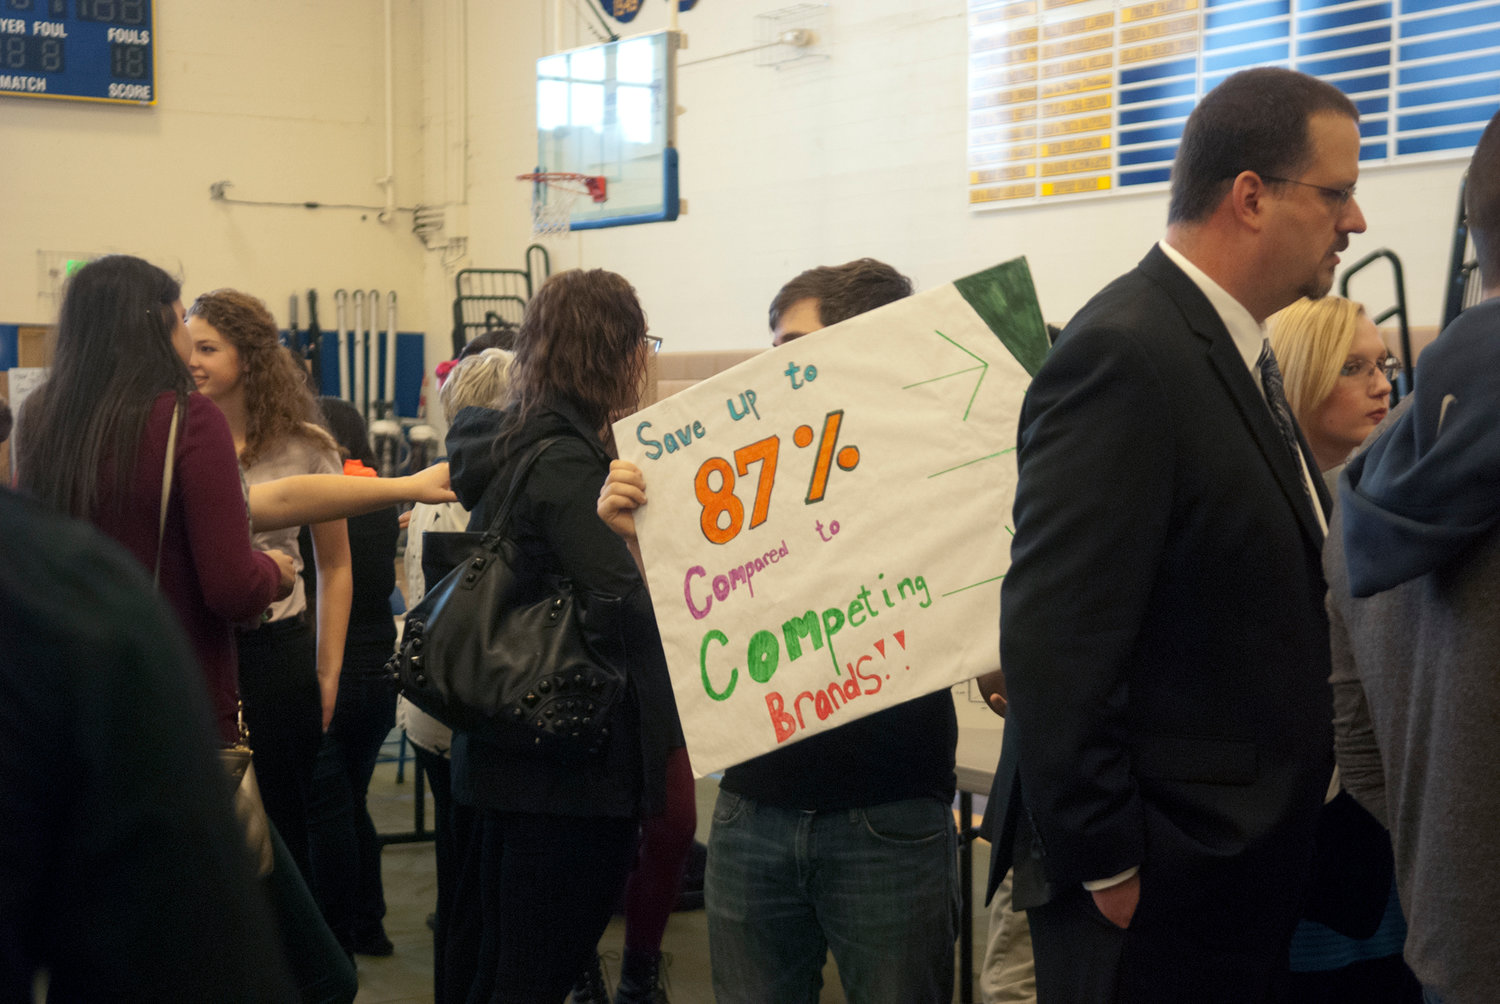 More than 400 juniors from Centralia and W.F. West high schools gathered Thursday morning for the trade show portion of Washington Business Week at Centralia College. The students tried to interest new investors — judges from the community — in their business ideas.